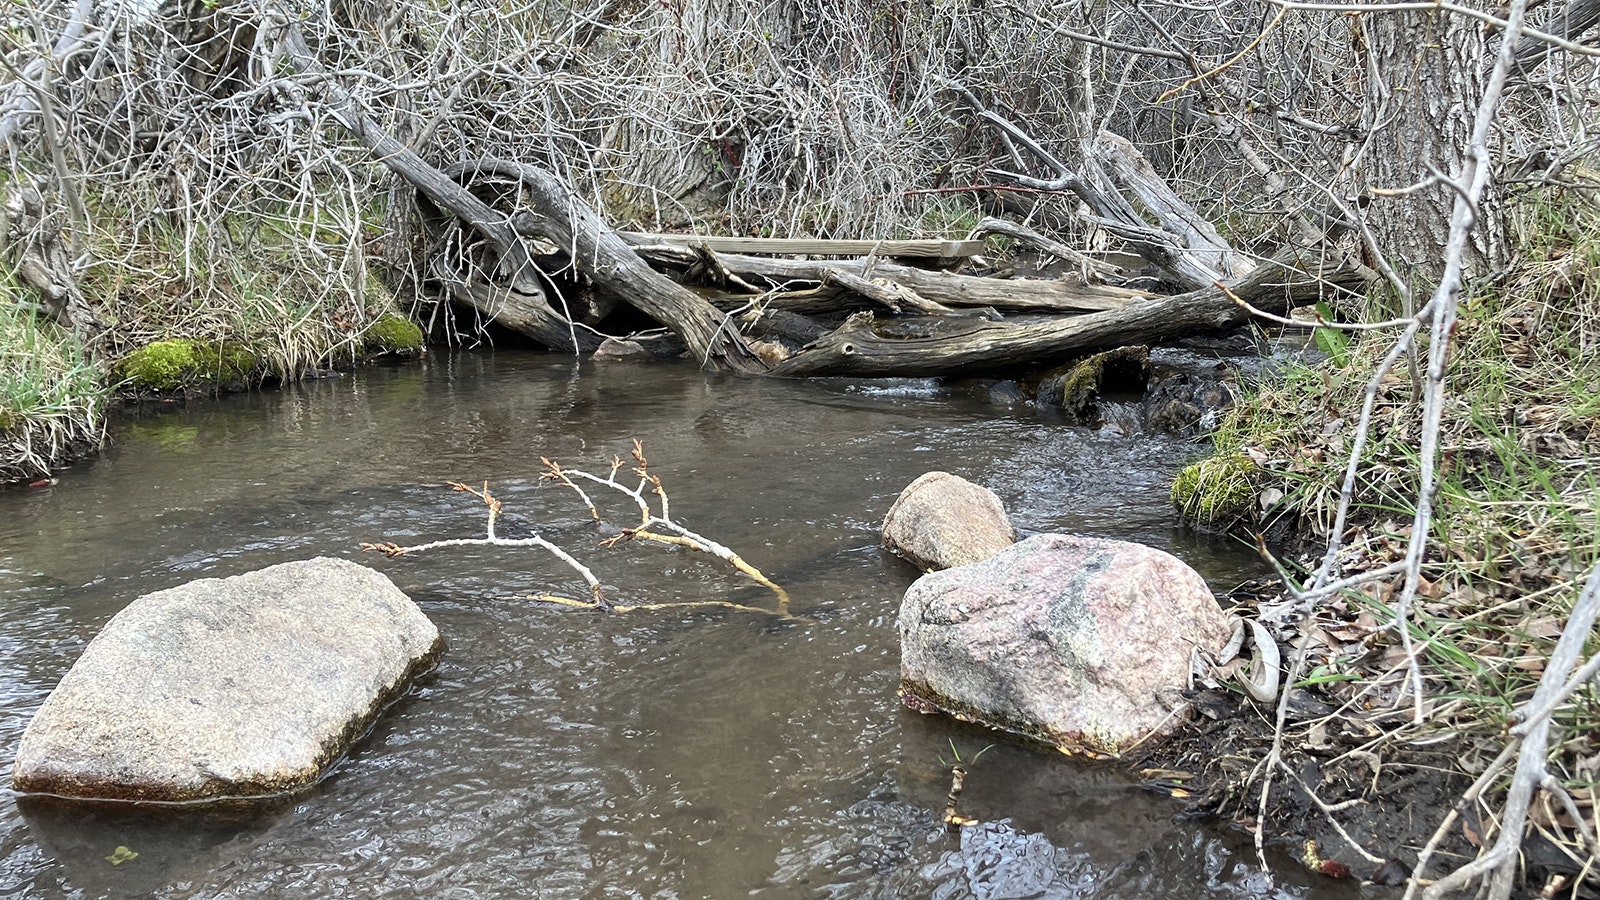 Squaw Creek at the base of Casper Mountain ran clear and fast as residents from the region explored the School Section that could be impacted by proposed gravel mining.